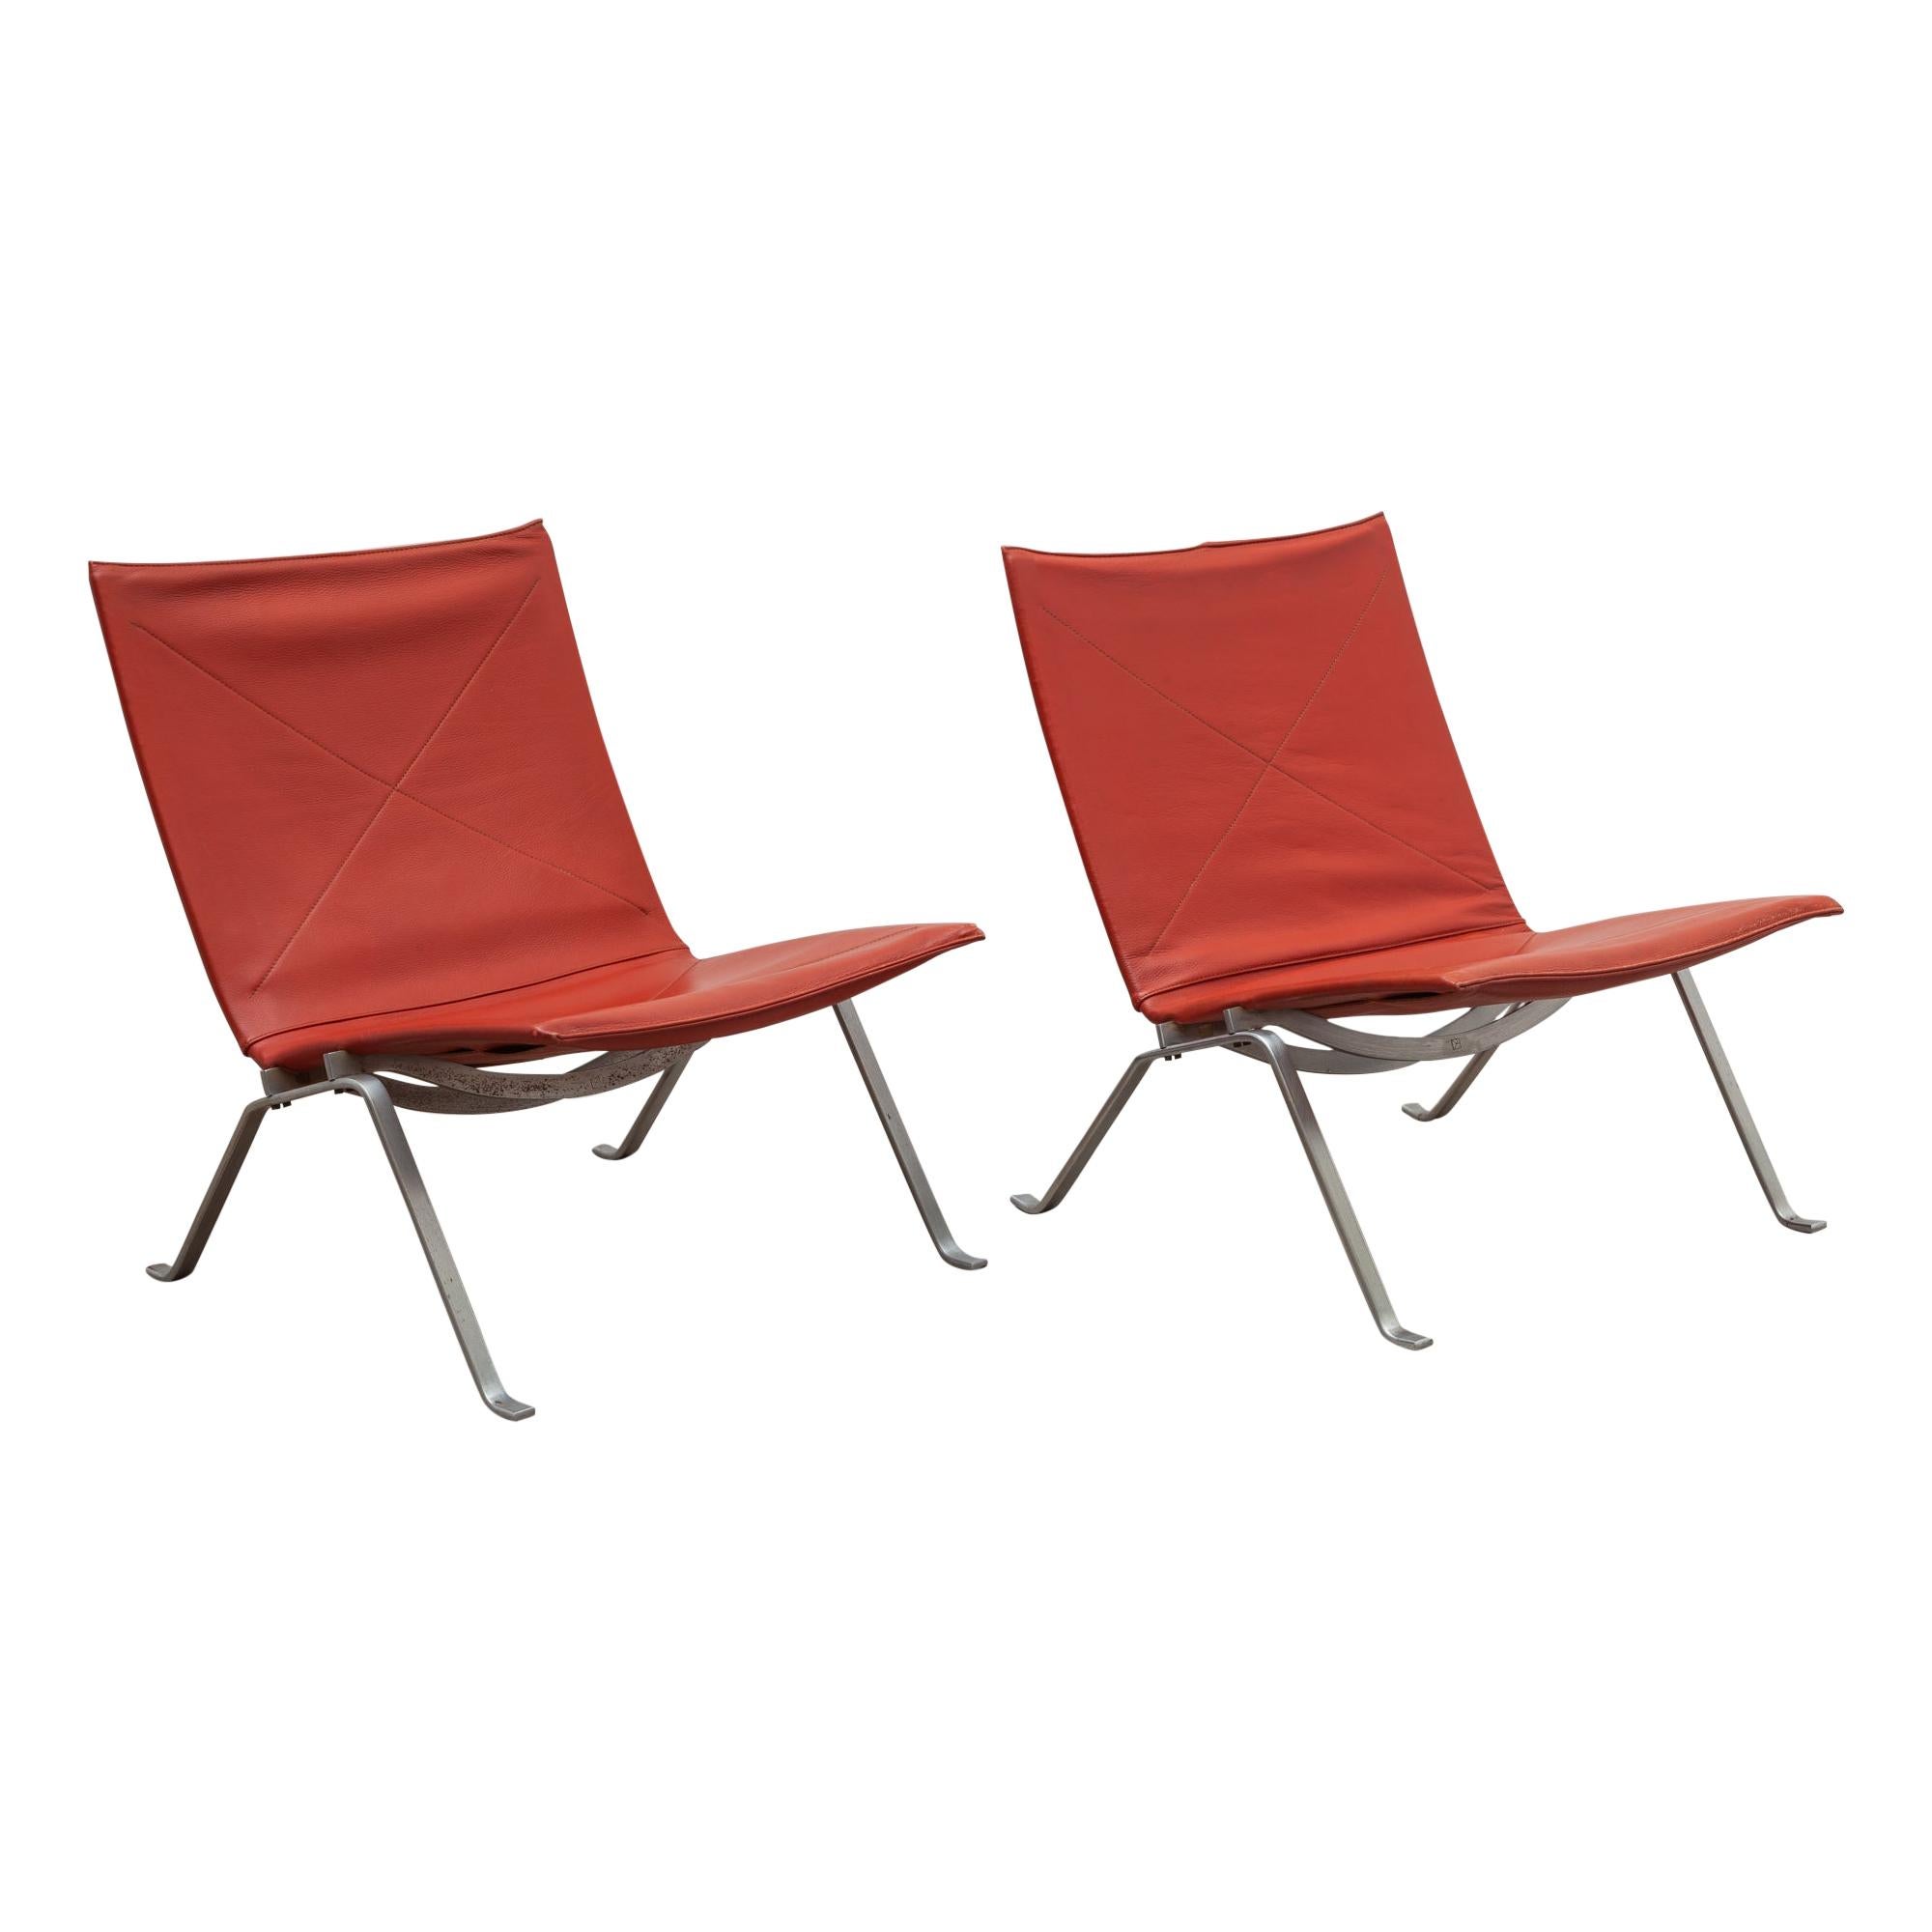 Pair of PK 22 Lounge Chairs by Poul Kjearholm, Denmark, Oxblood Leather